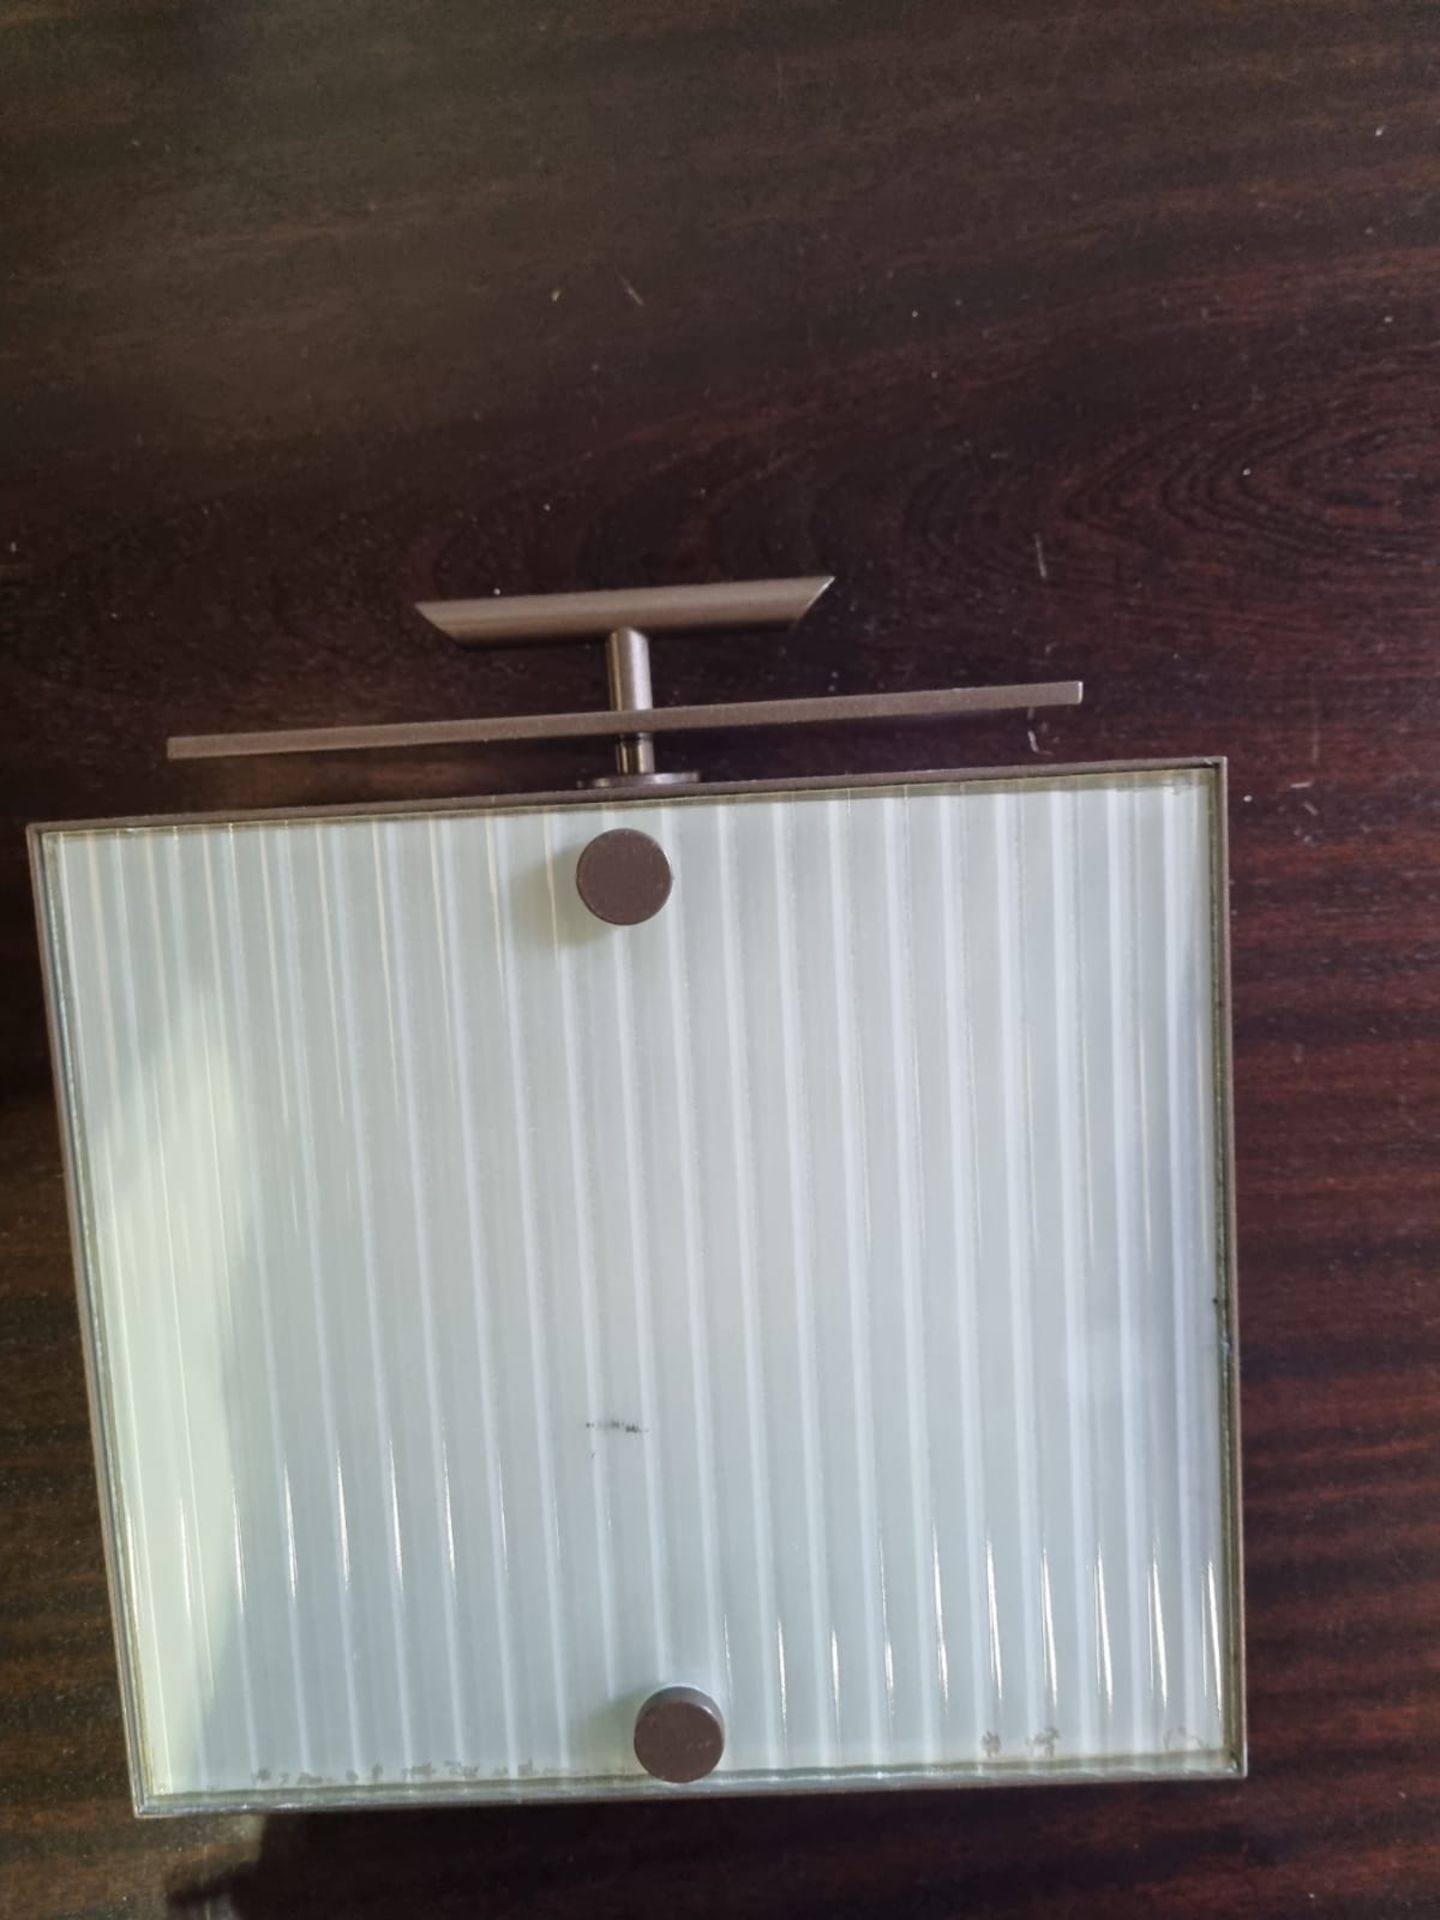 Bronze wall light frosted glass panel 25 x 11 x 23cm ( The Beaumont London 59B) - Image 2 of 3